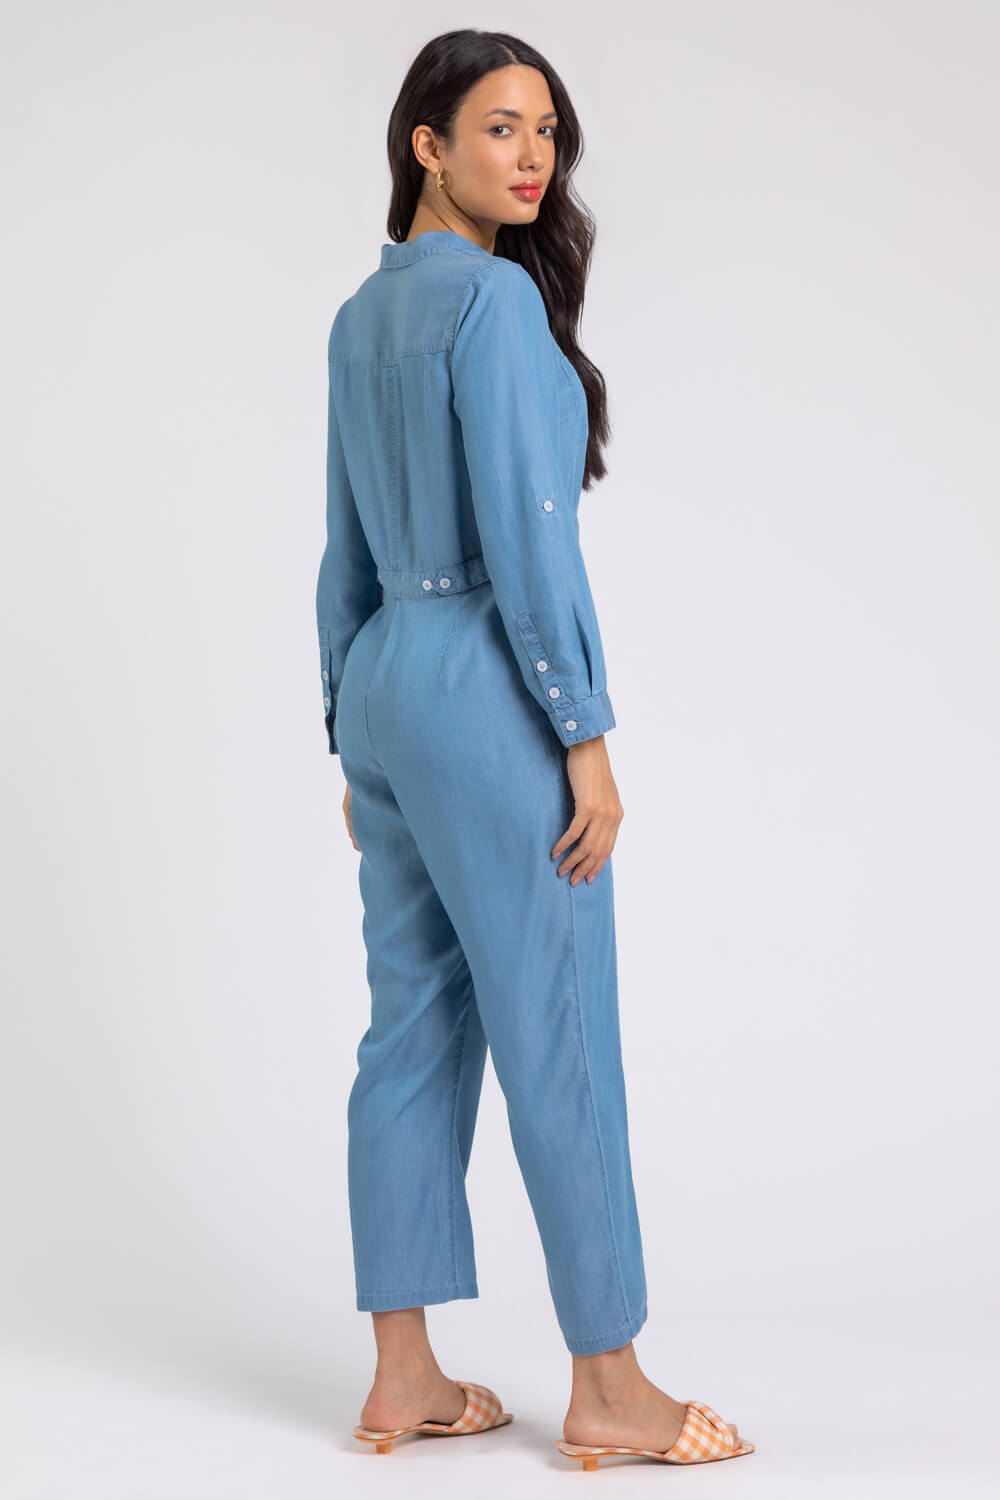 Denim Buttoned Collar Utility Jumpsuit, Image 2 of 5